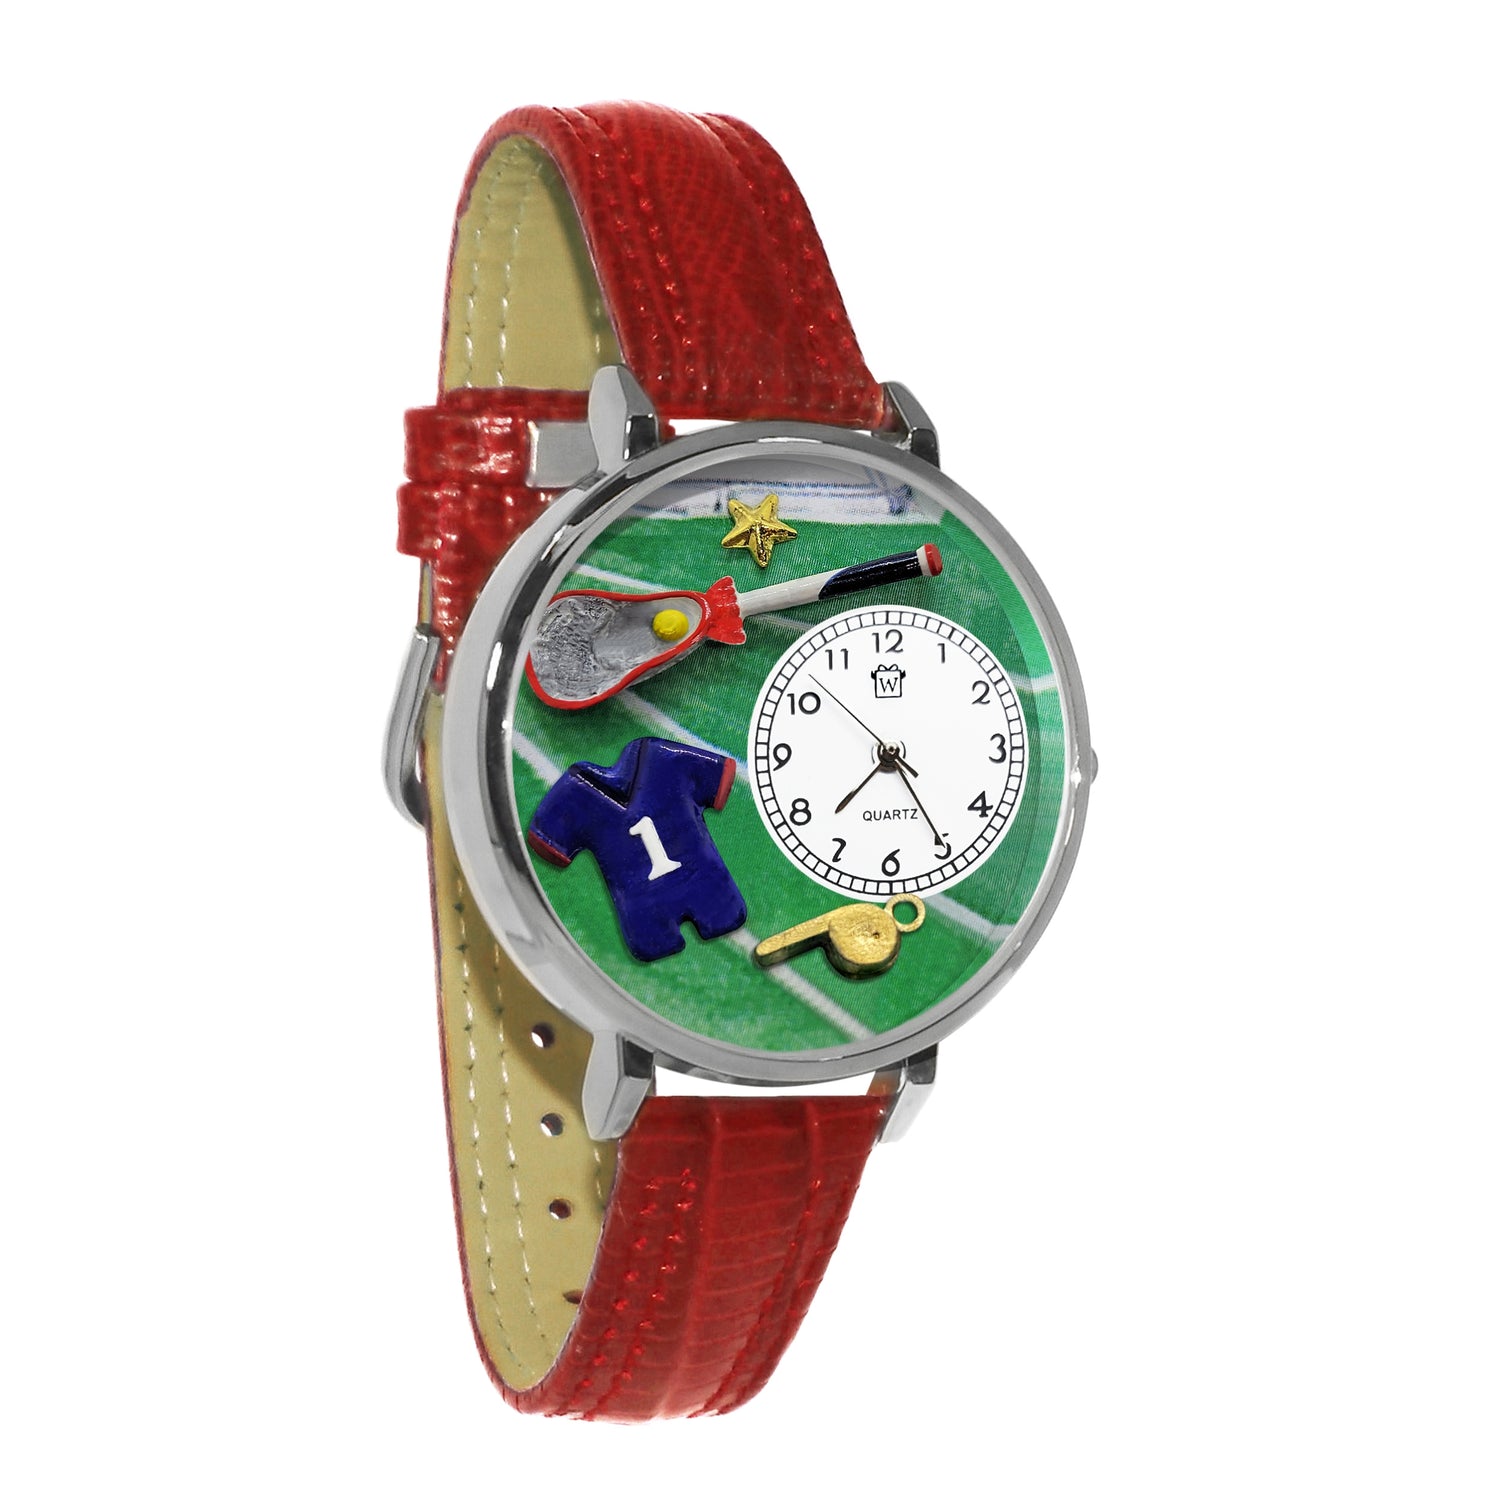 Whimsical Gifts | Lacrosse 3D Watch Large Style | Handmade in USA | Hobbies & Special Interests | Sports | Novelty Unique Fun Miniatures Gift | Silver Finish Shorts Red eather Watch Band